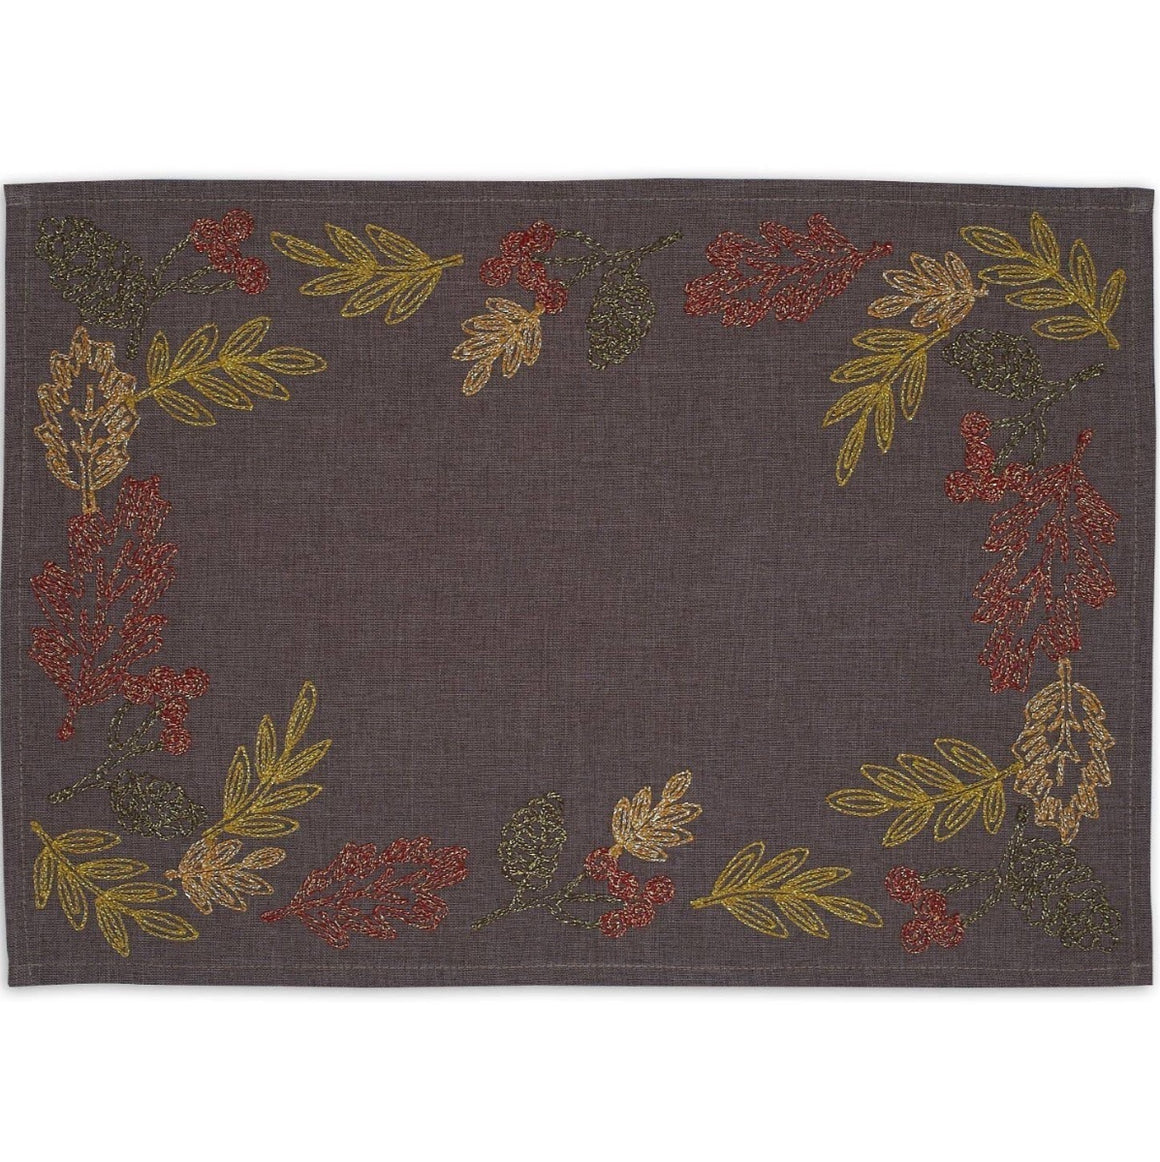 Shimmering Leaves Embroidered Placemat